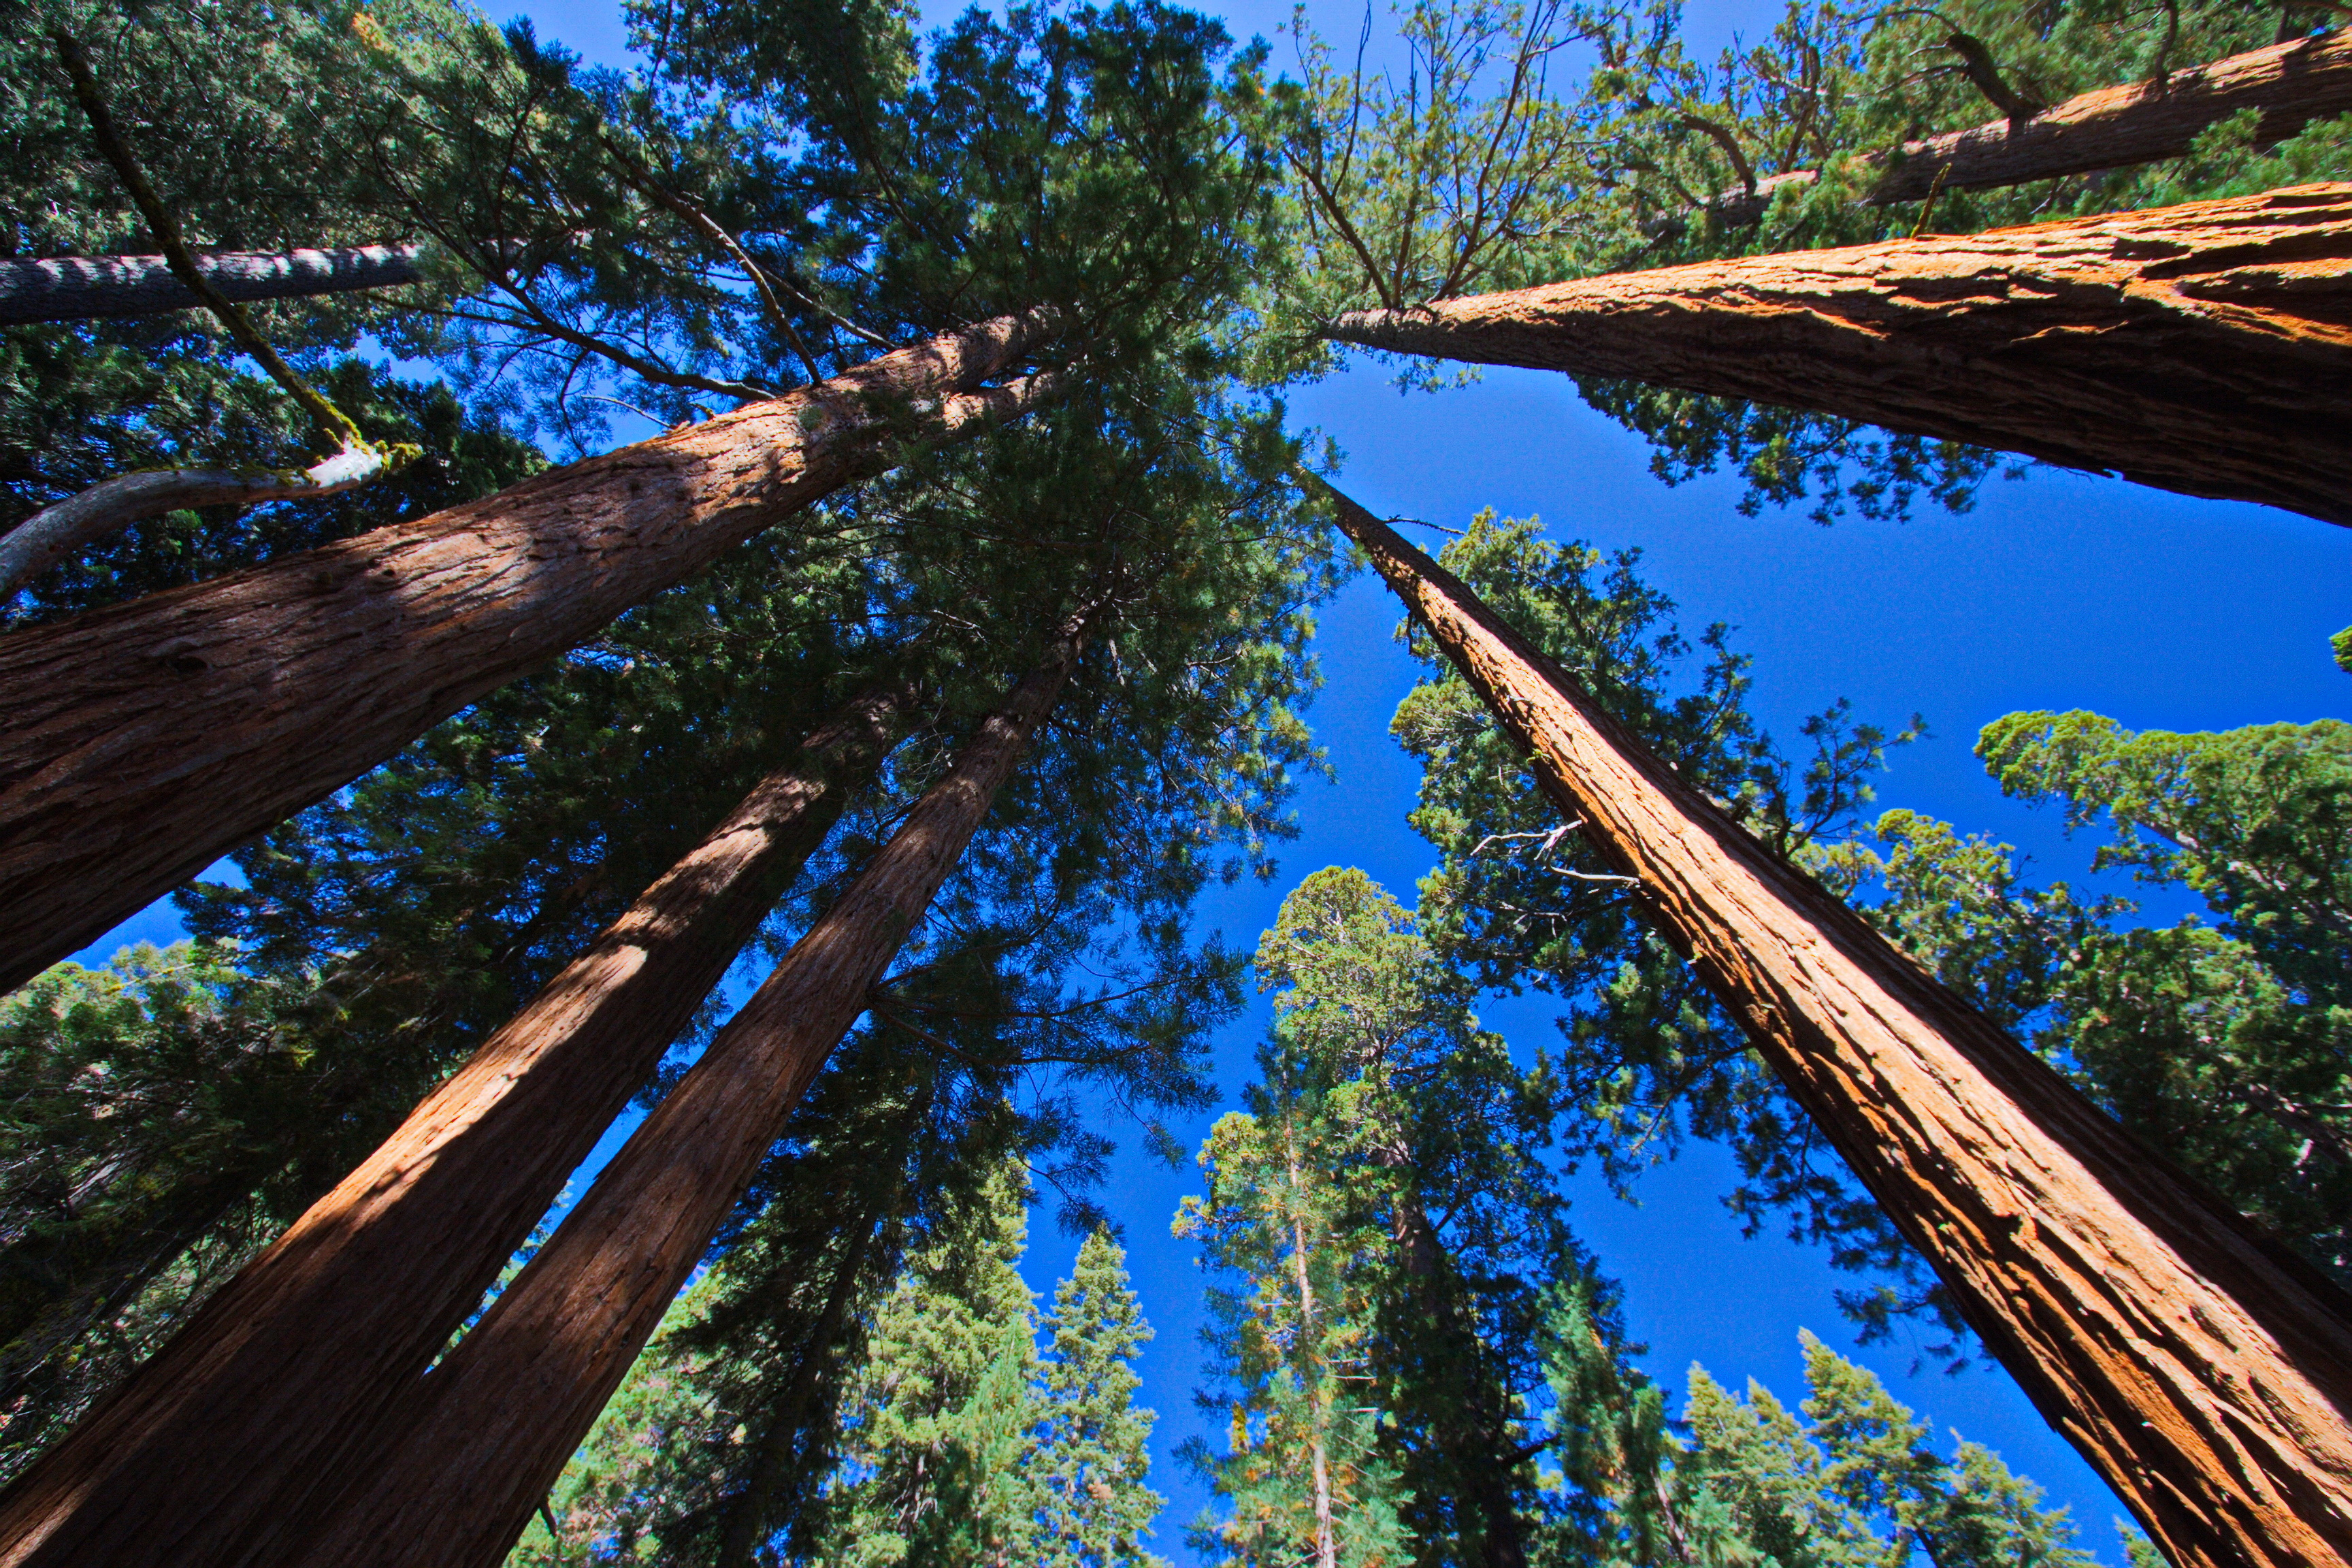 Giant trees in Sequoia NP in California in the USA